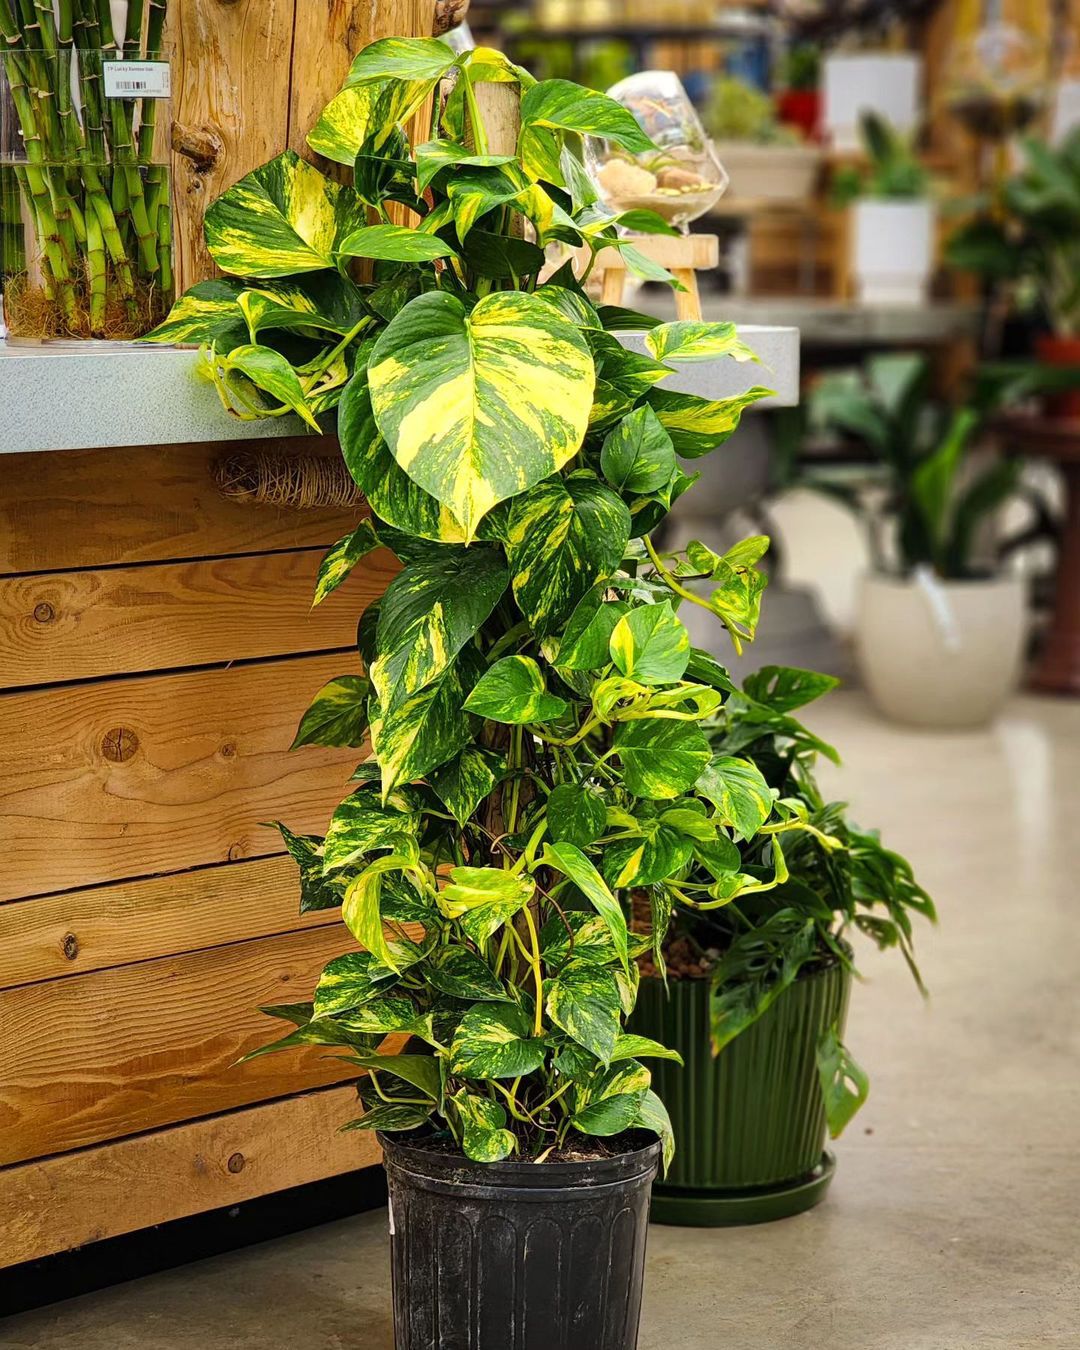 Green up Your Daughter's Room with Adorable Houseplants